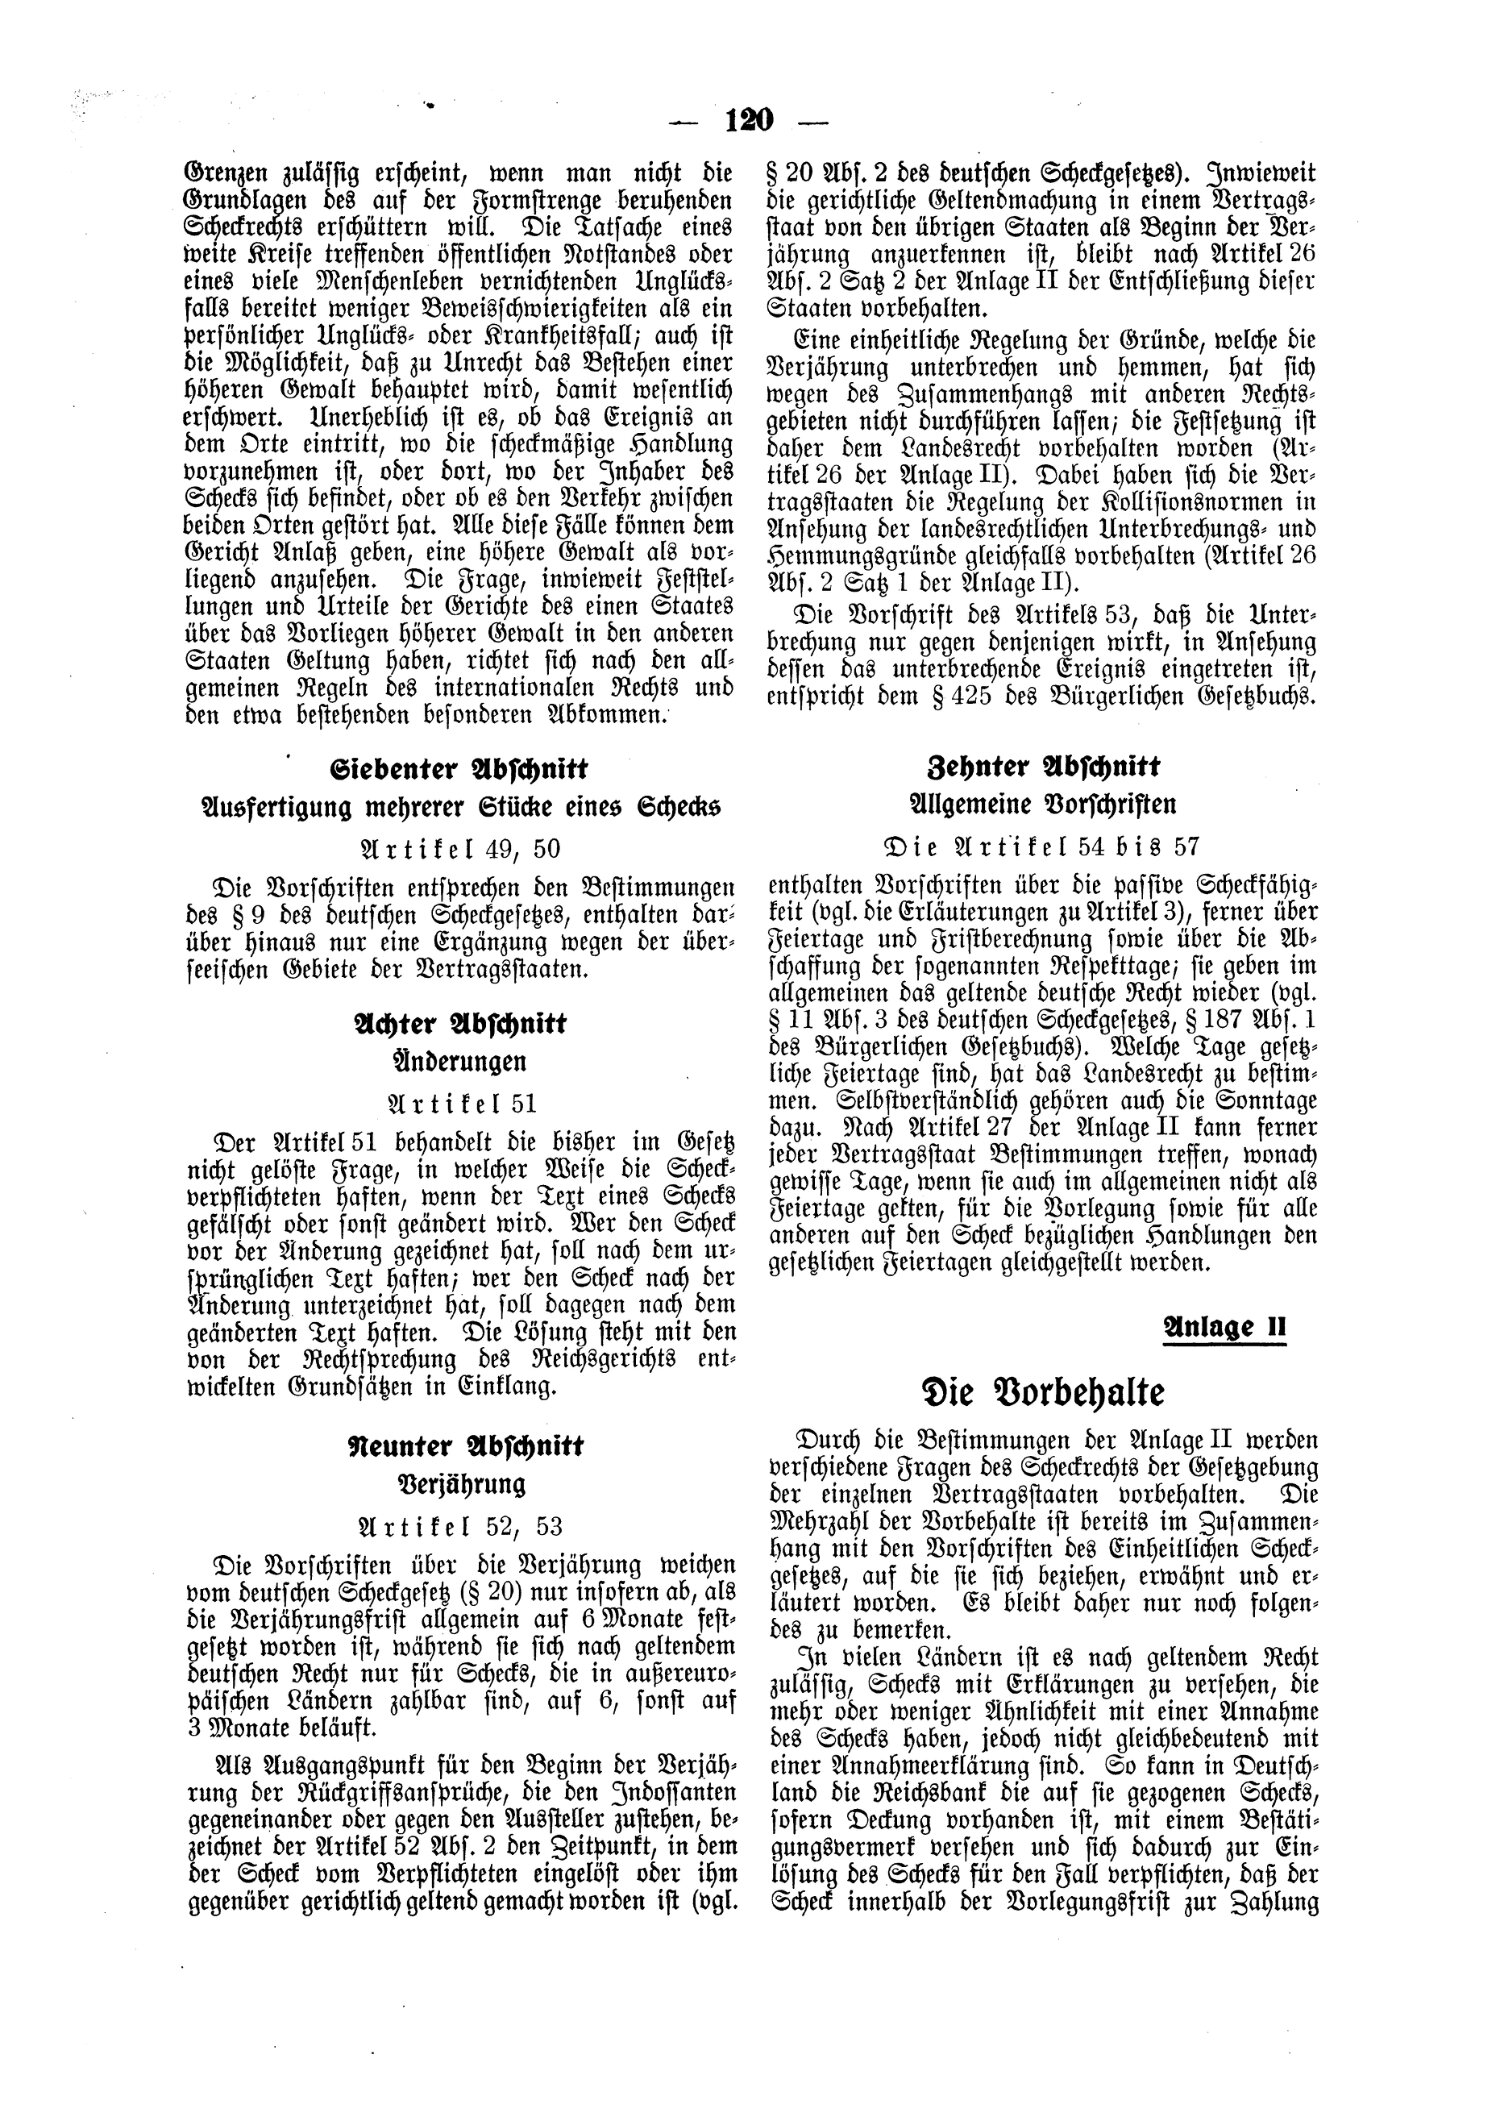 Scan of page 120